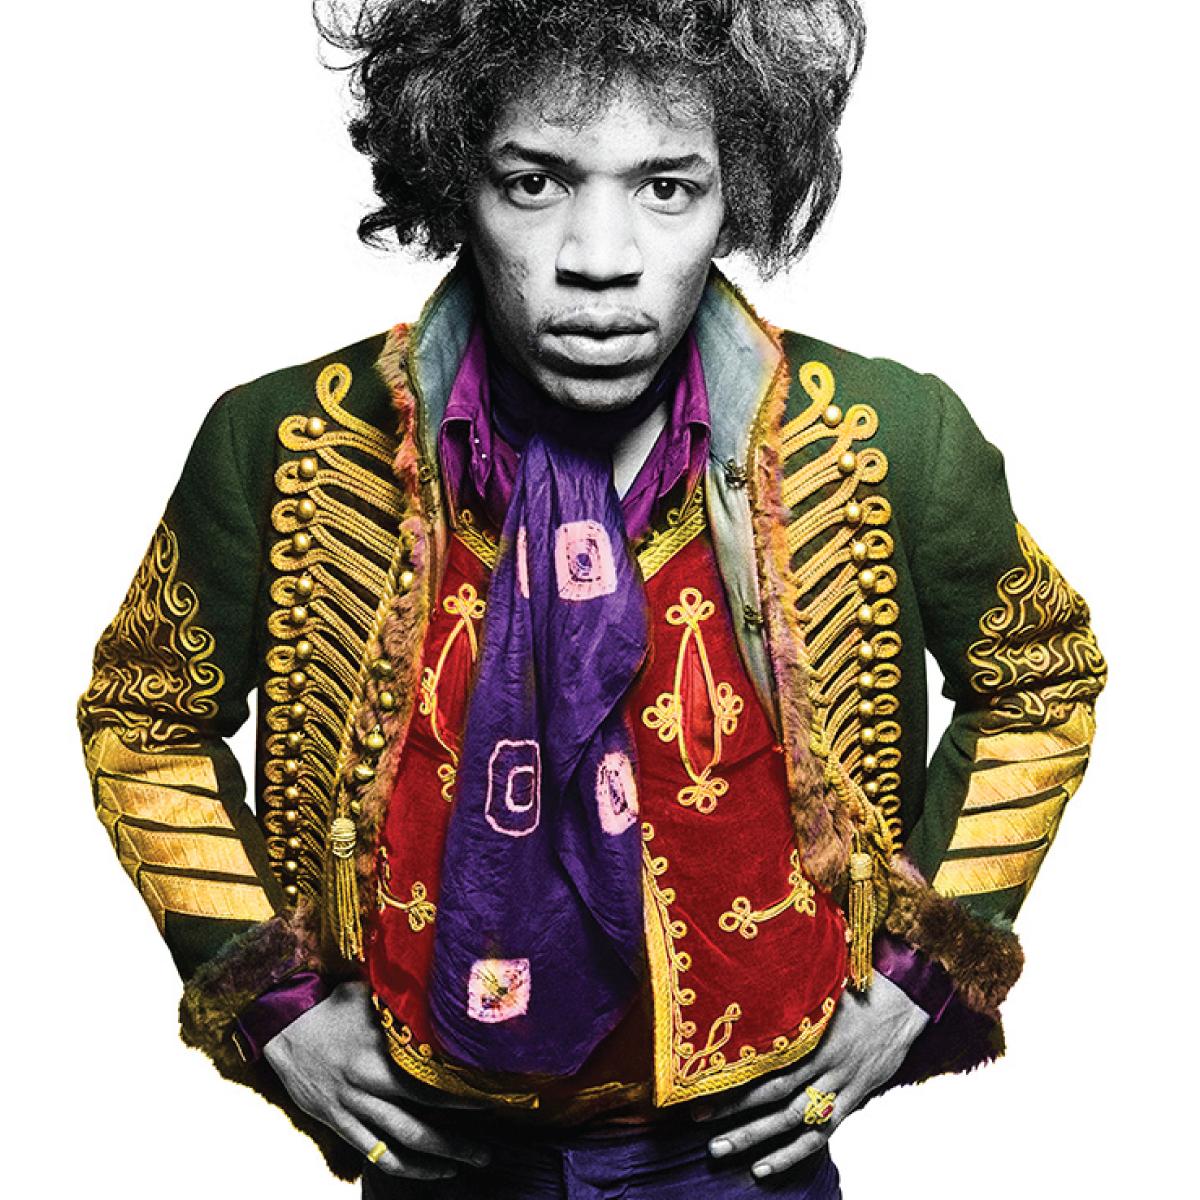 Jimi Hendrix “Classic Color” 1967 by Gered Mankovitz

Available is the following sizes, signed and numbered by Gered Mankowitz.

16x20” - Edition 50
20x24" - Edition 50
30x40” - Edition 25
50x53" - Edition 24
